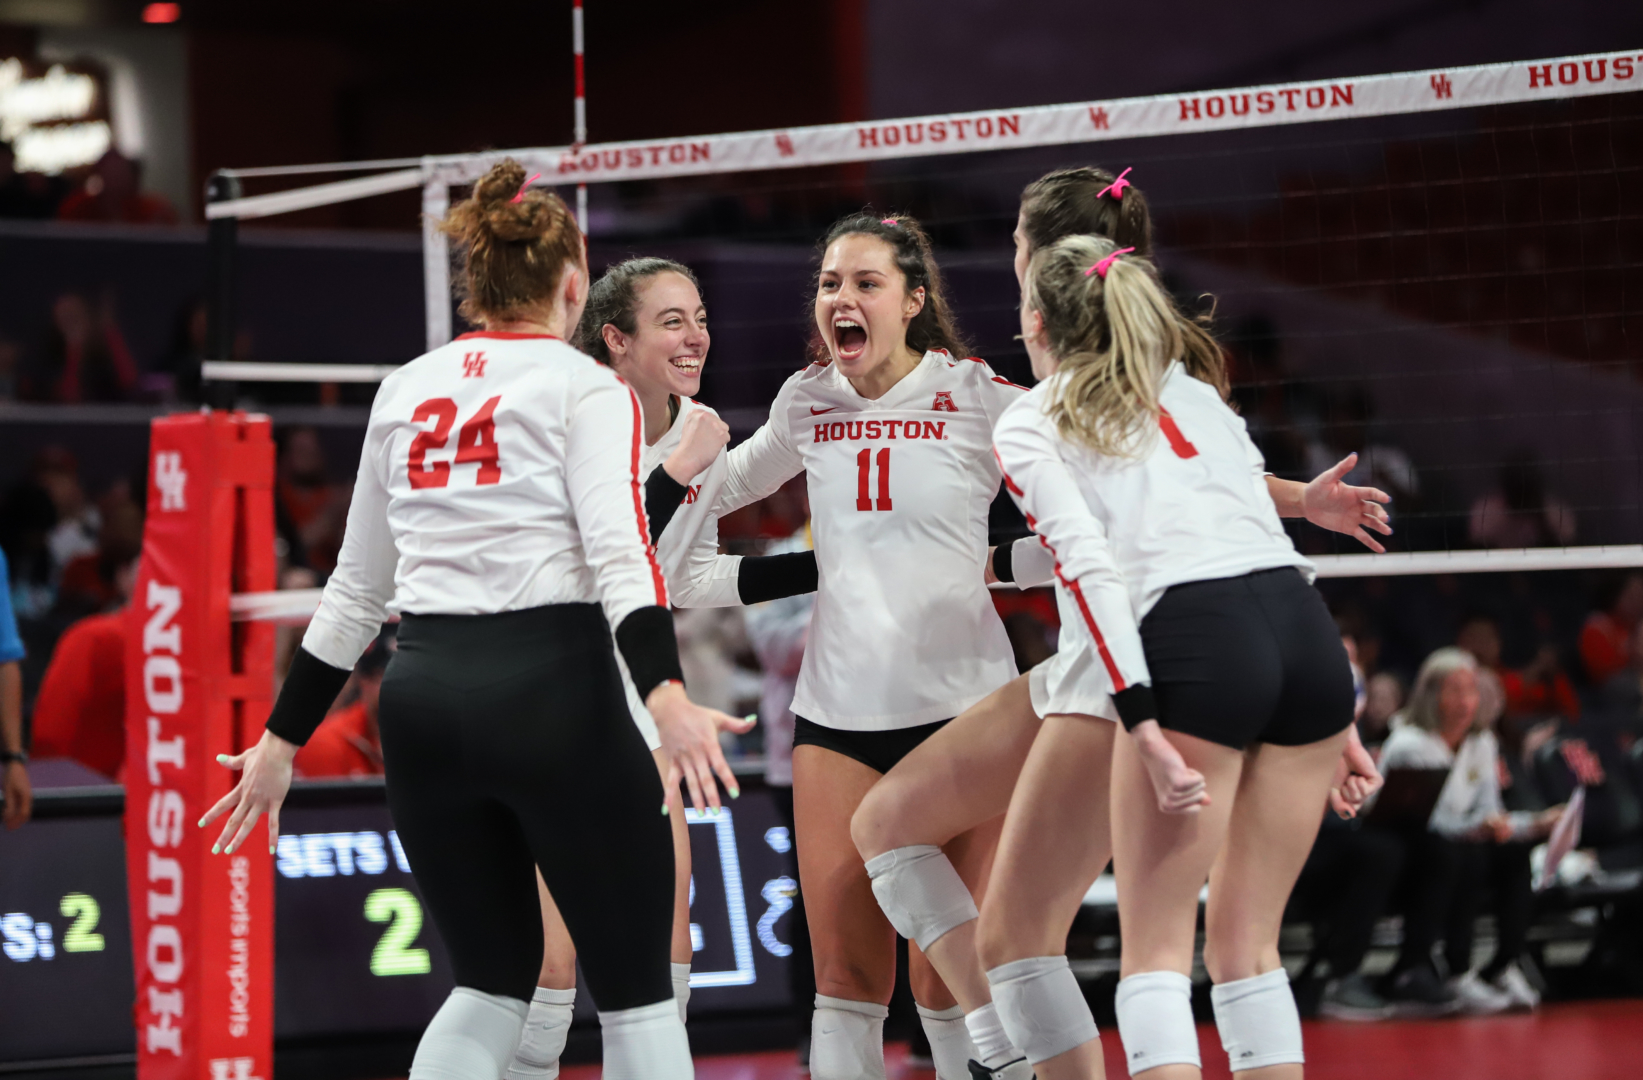 UH volleyball remains perfect in AAC play with a pair of weekend sweeps. | Sean Thomas/The Cougar